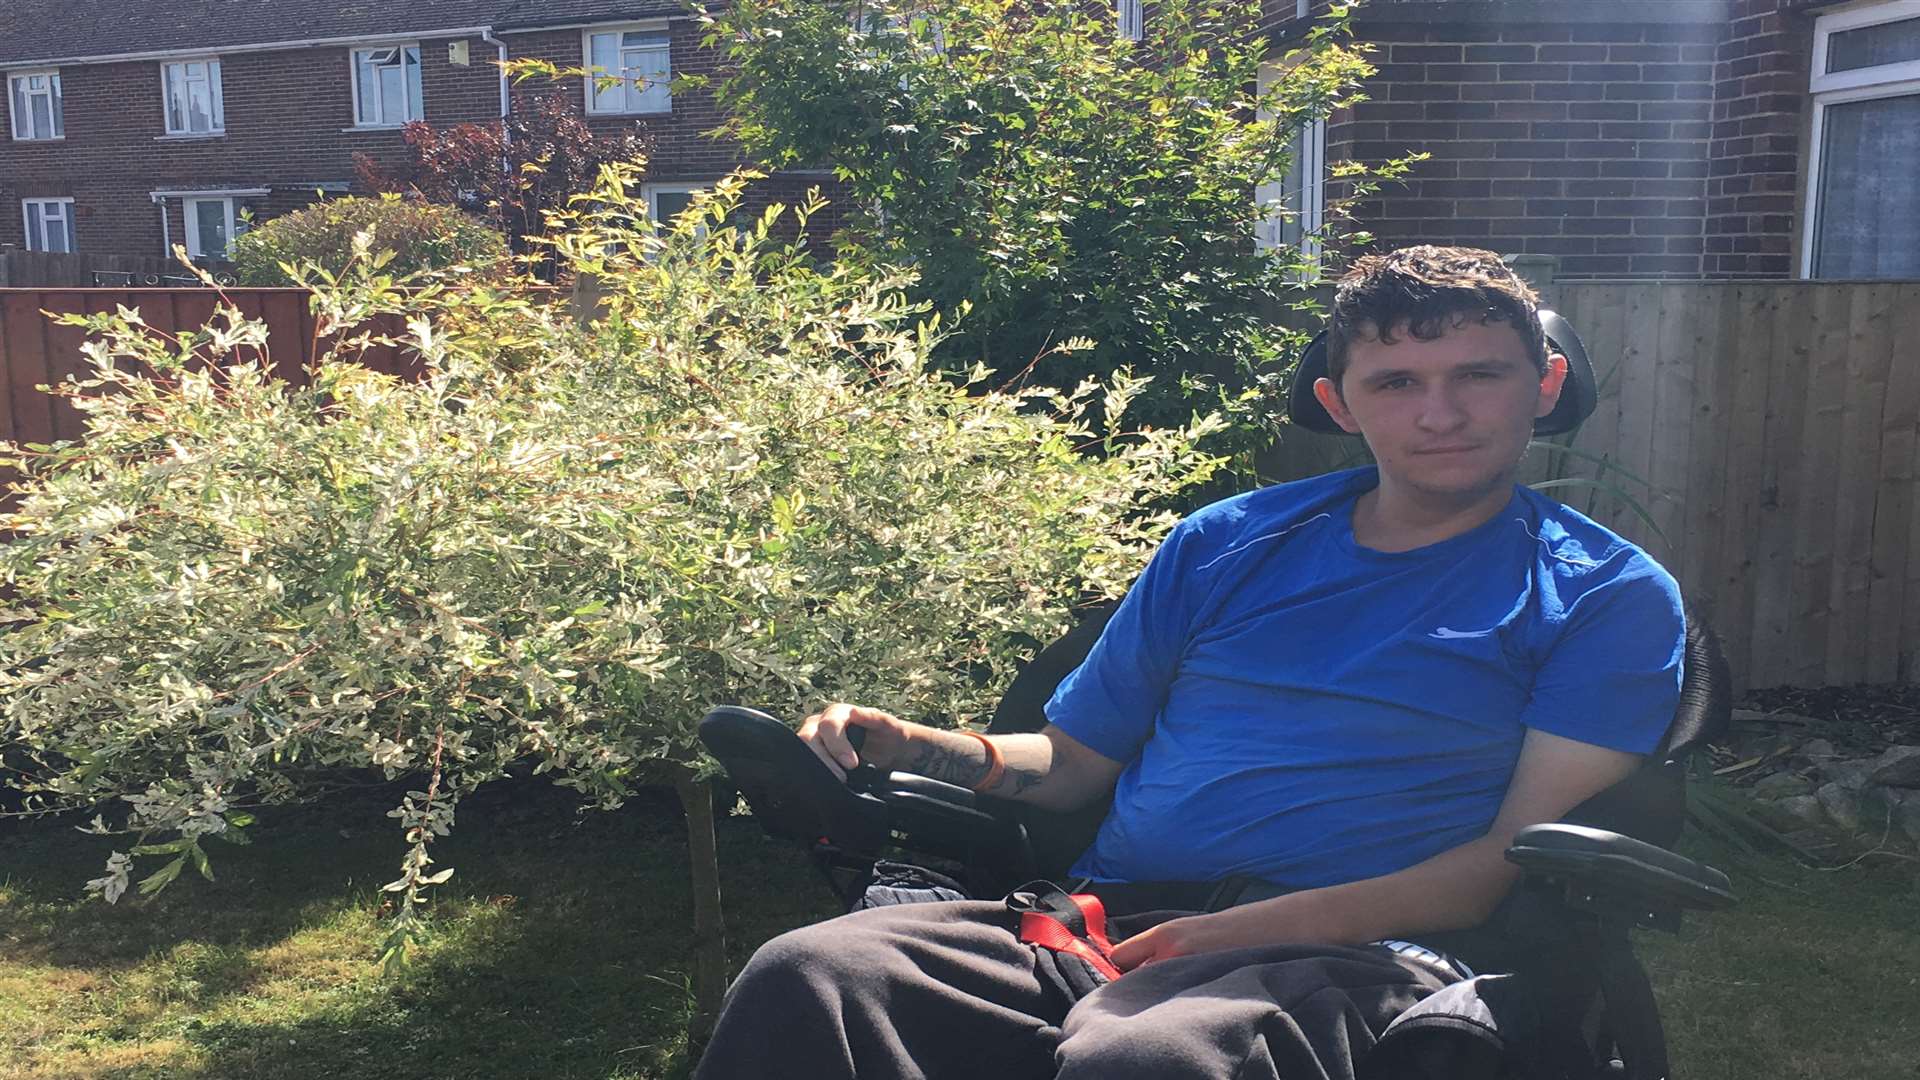 Ricky Dalton, 22, has been diagnosed with motor neurone disease